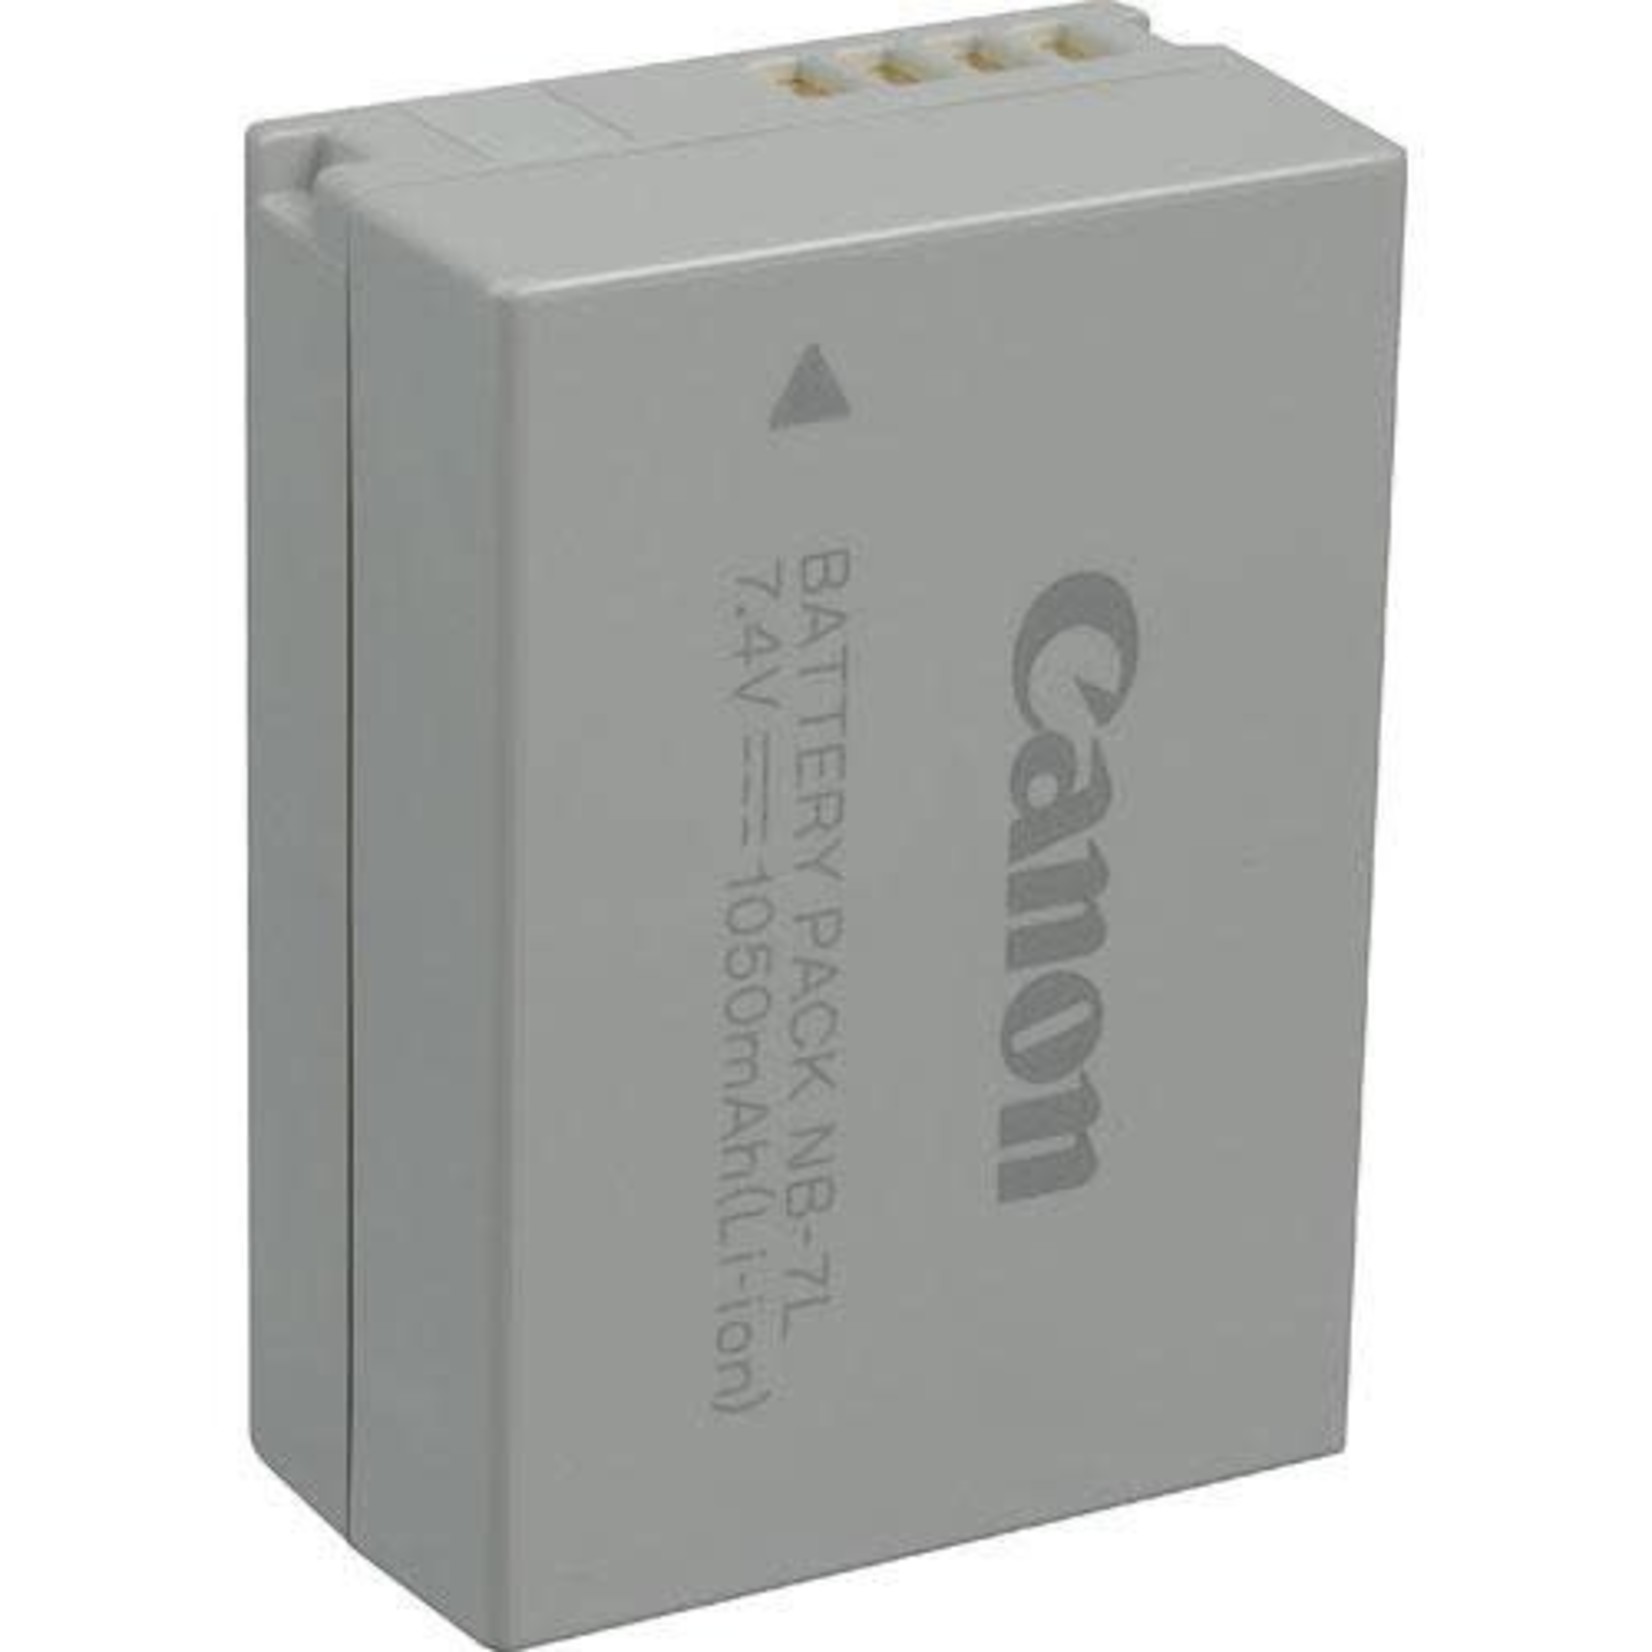 Canon Canon NB-7L Lithium-Ion Battery Pack (7.4V, 1050mAh)